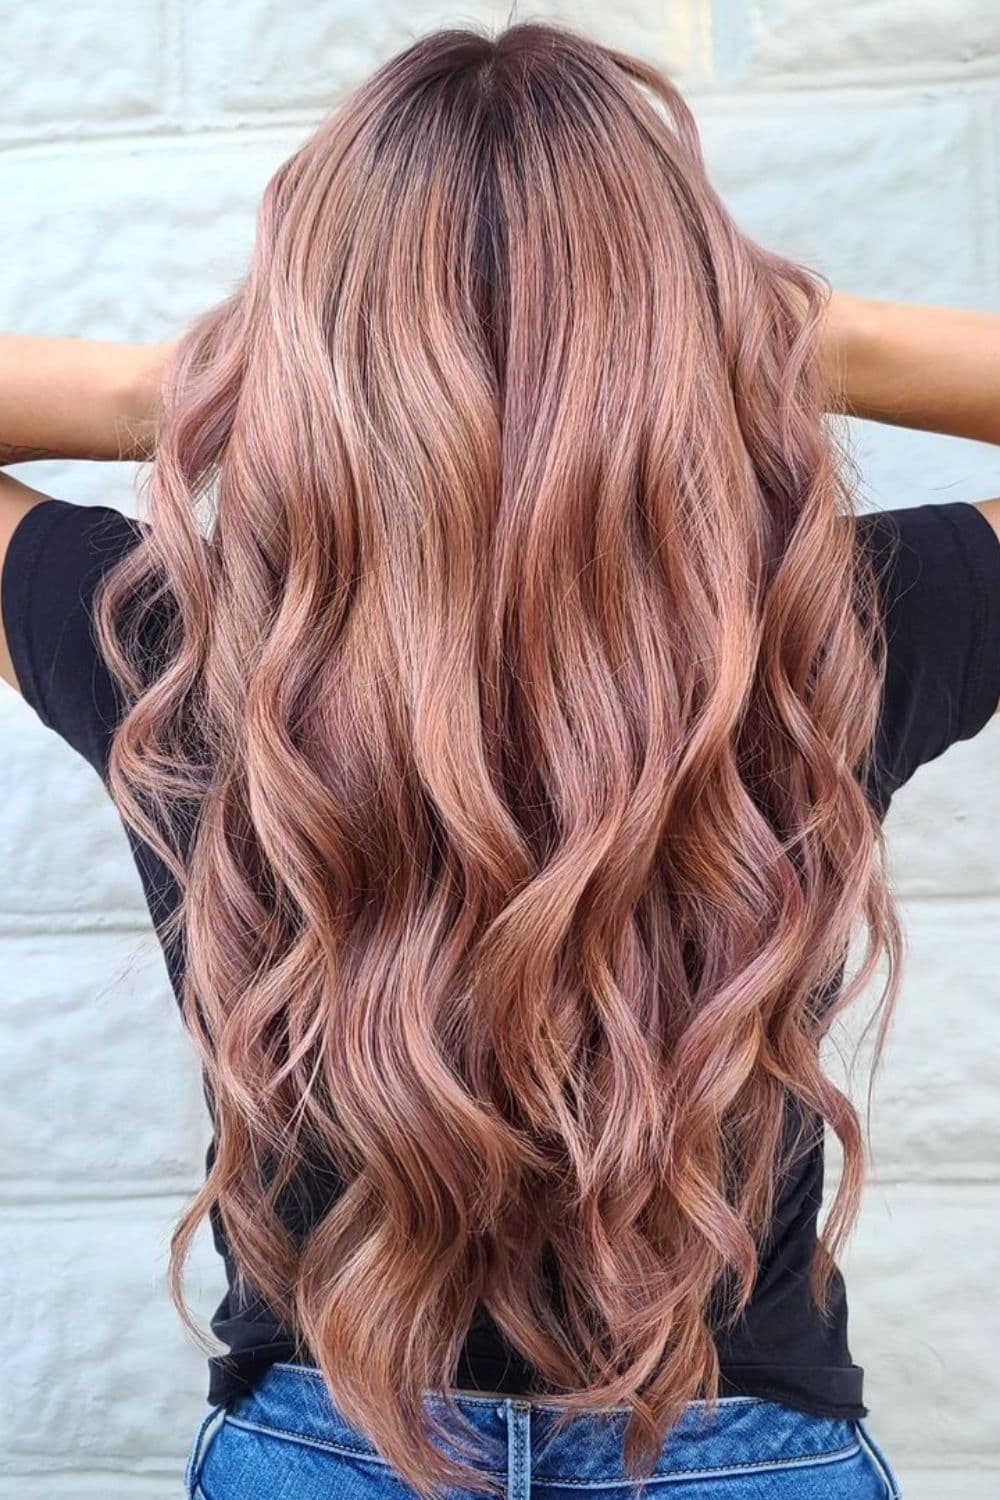 A woman with a long rose gold hair with big curls.